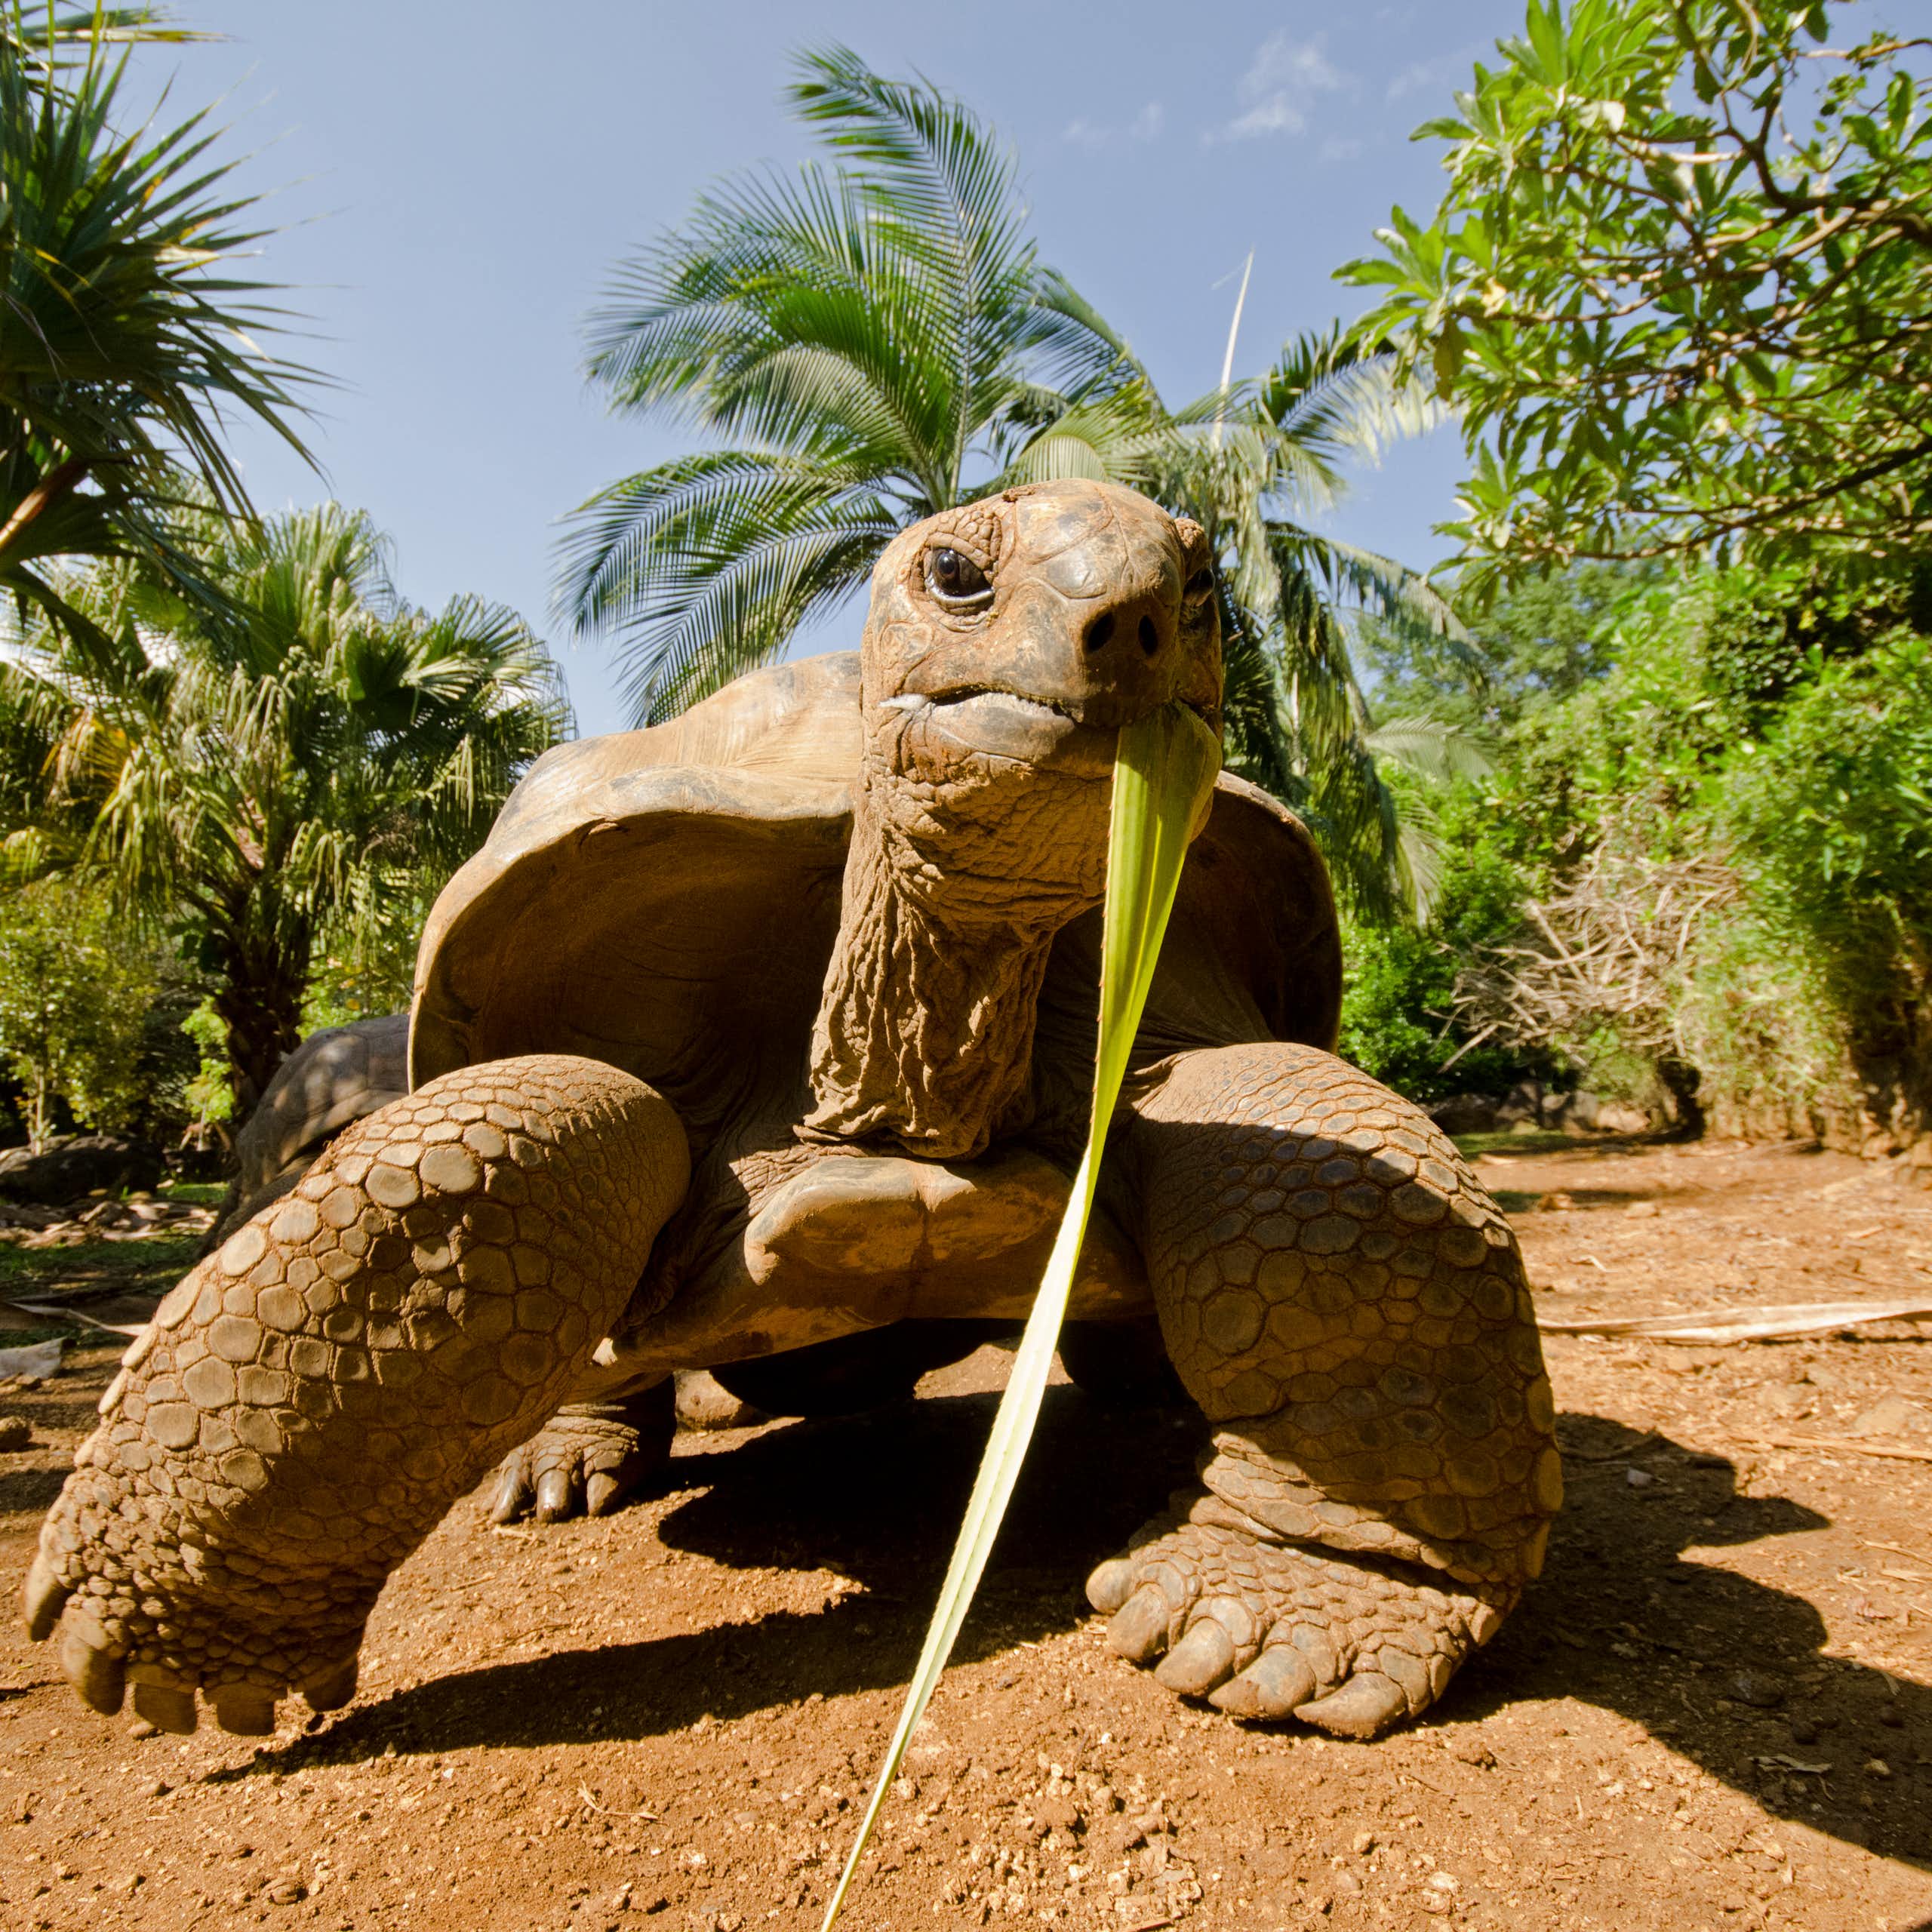 A tortoise eating a leaf stands on some dry sand in front of palm trees and bushes